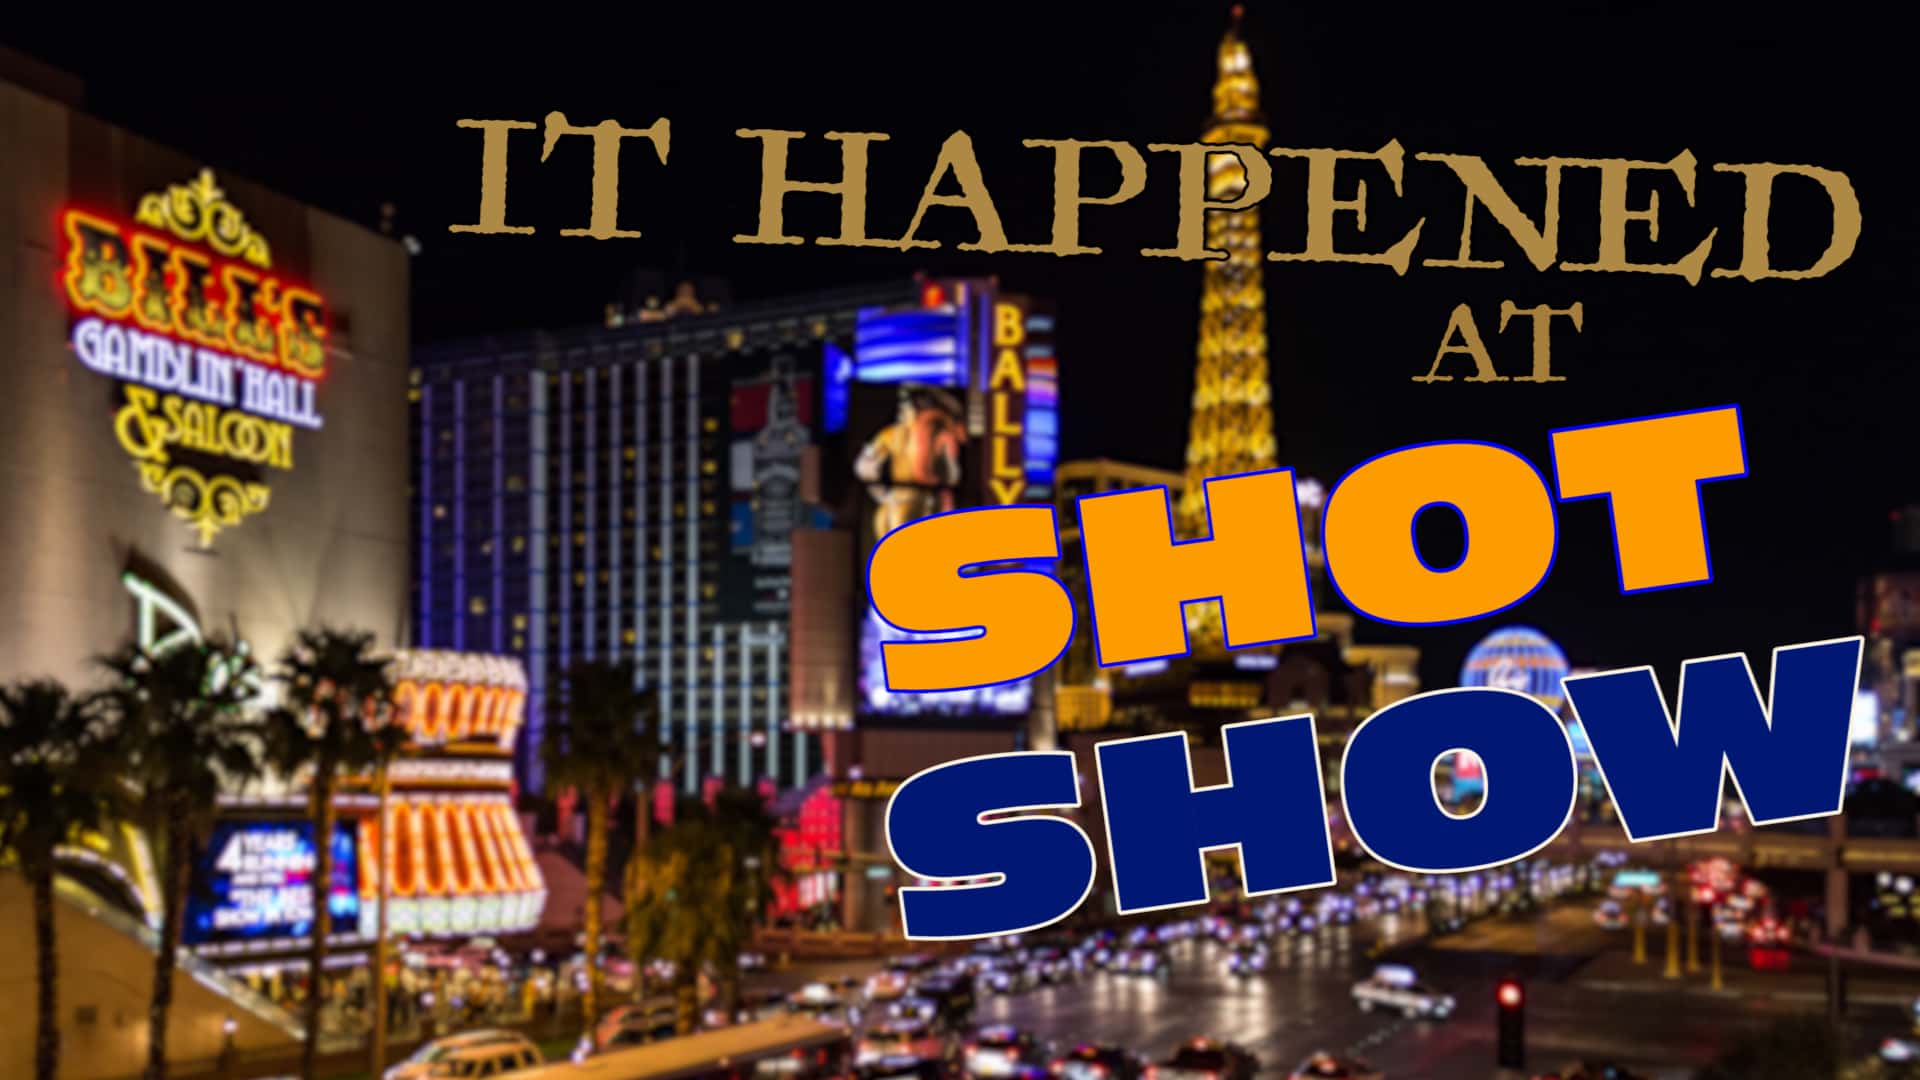 tales from SHOT Show